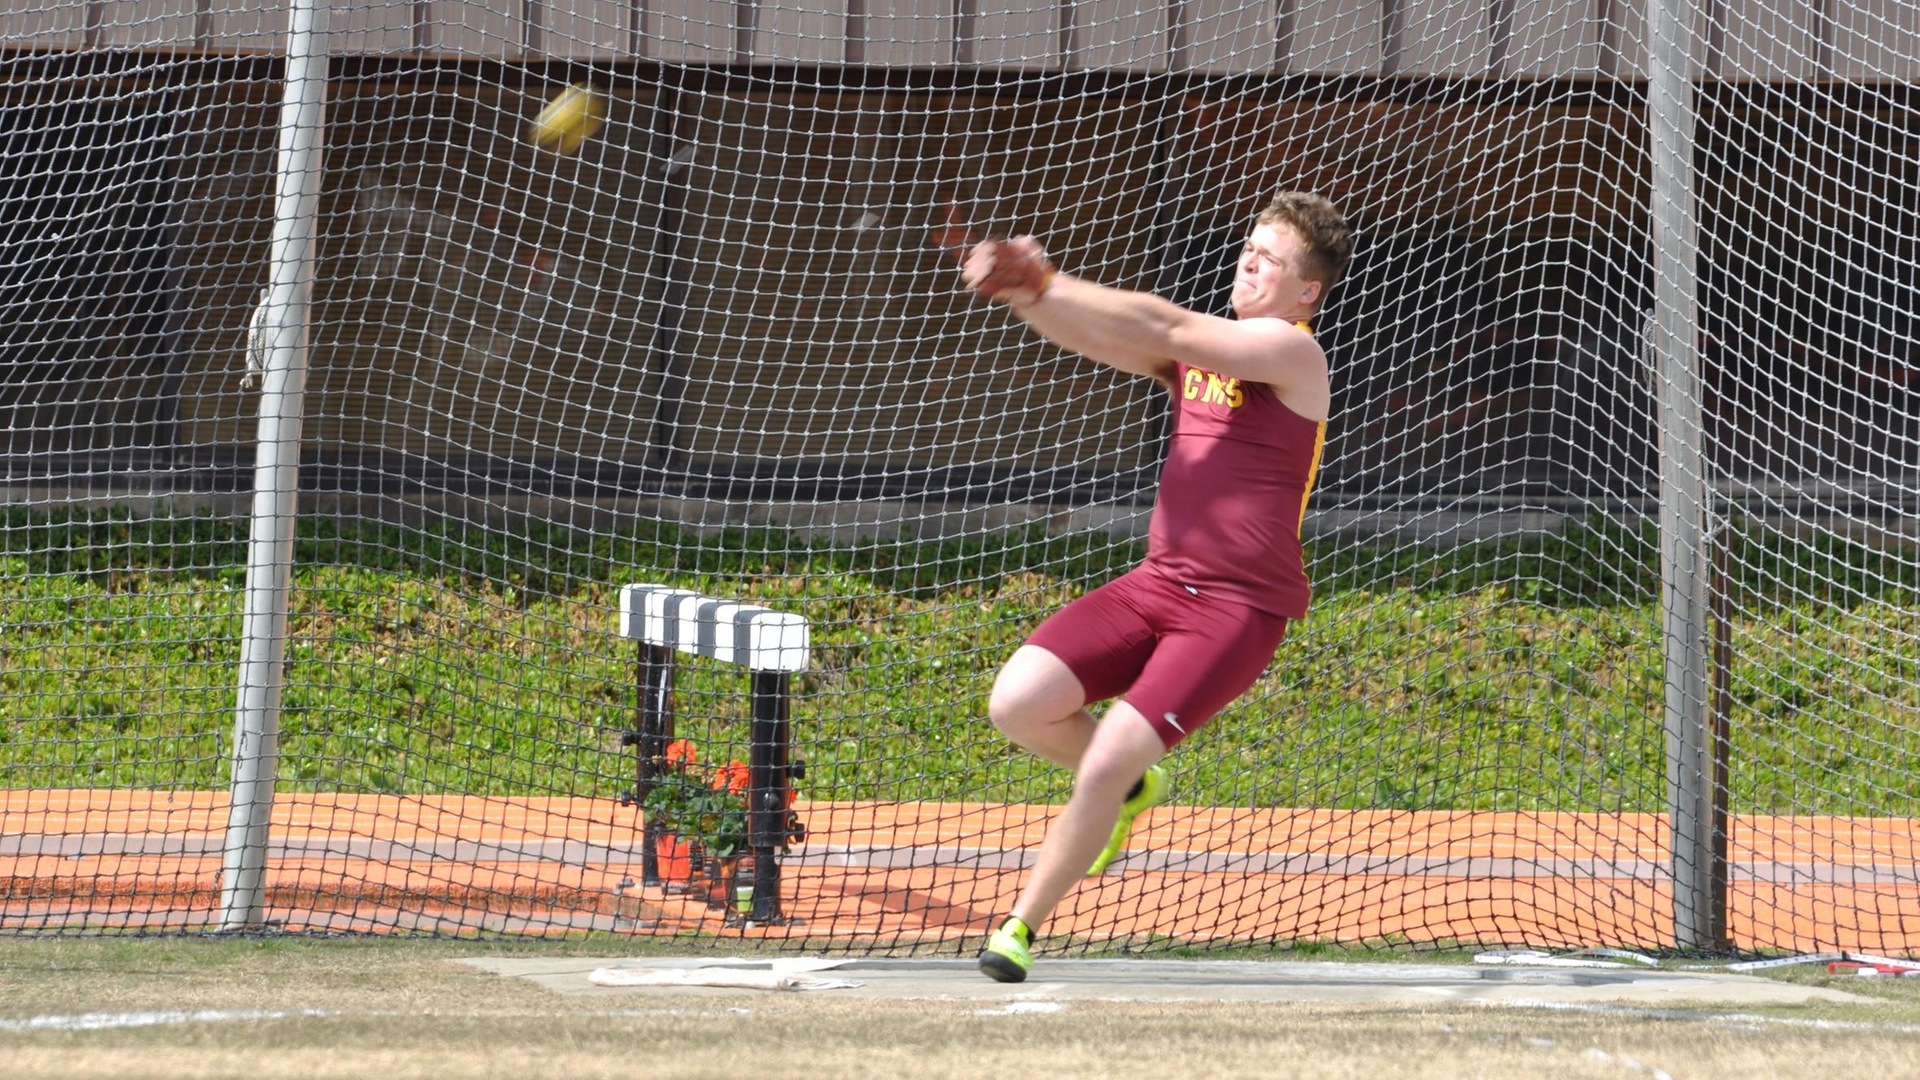 Jason Bowman earned the SCIAC title in the hammer